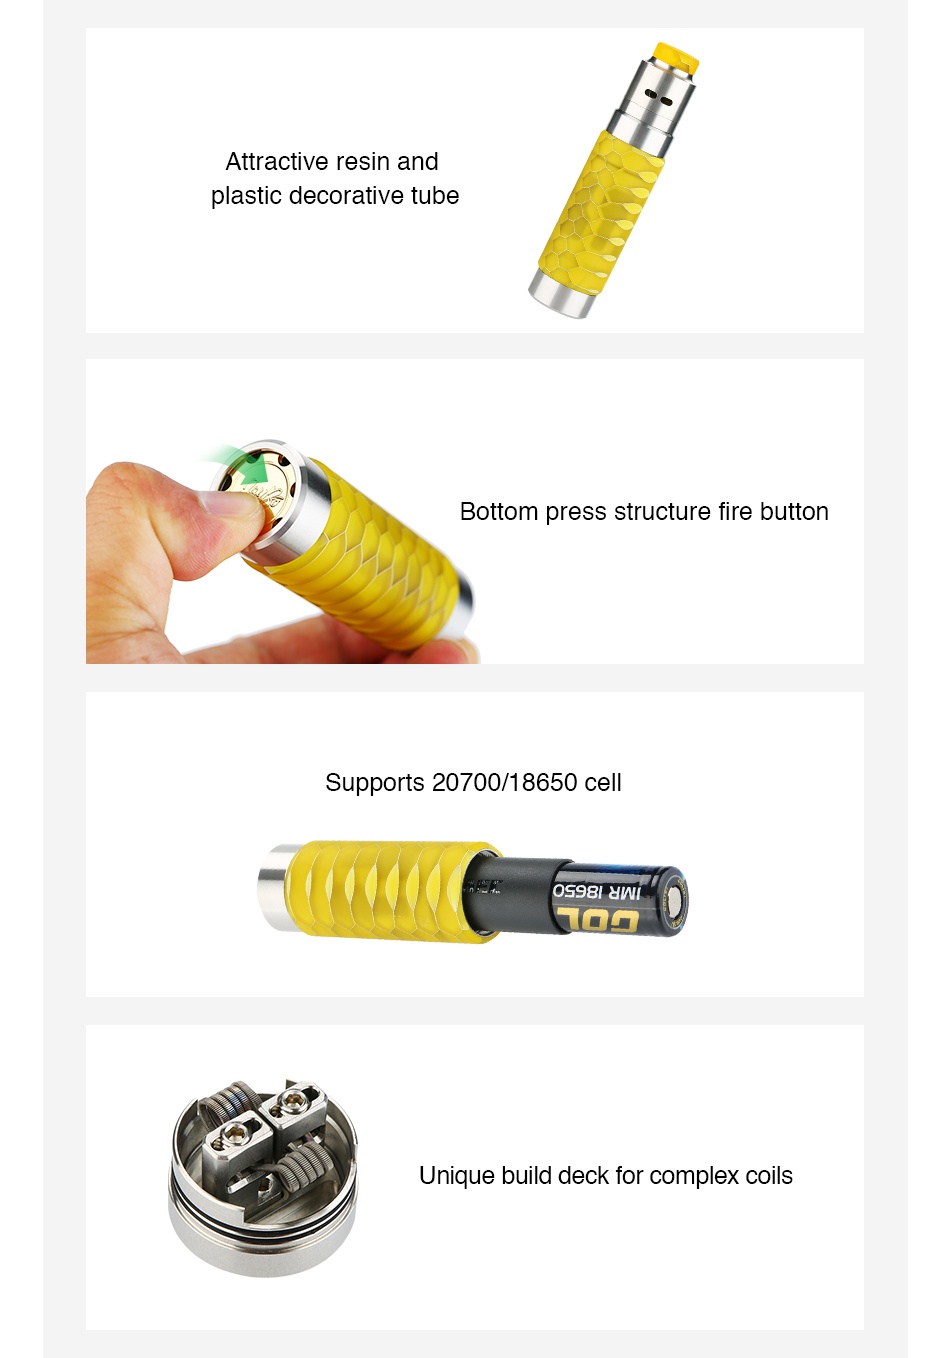 WISMEC Reuleaux RX Machina 20700 Mech MOD with Guillotine RDA Kit 3000mAh Attractive resin and plastic decorative tube Bottom press structure fire button Supports 20700 18650 C OS981 dWI Unique build deck for complex coils